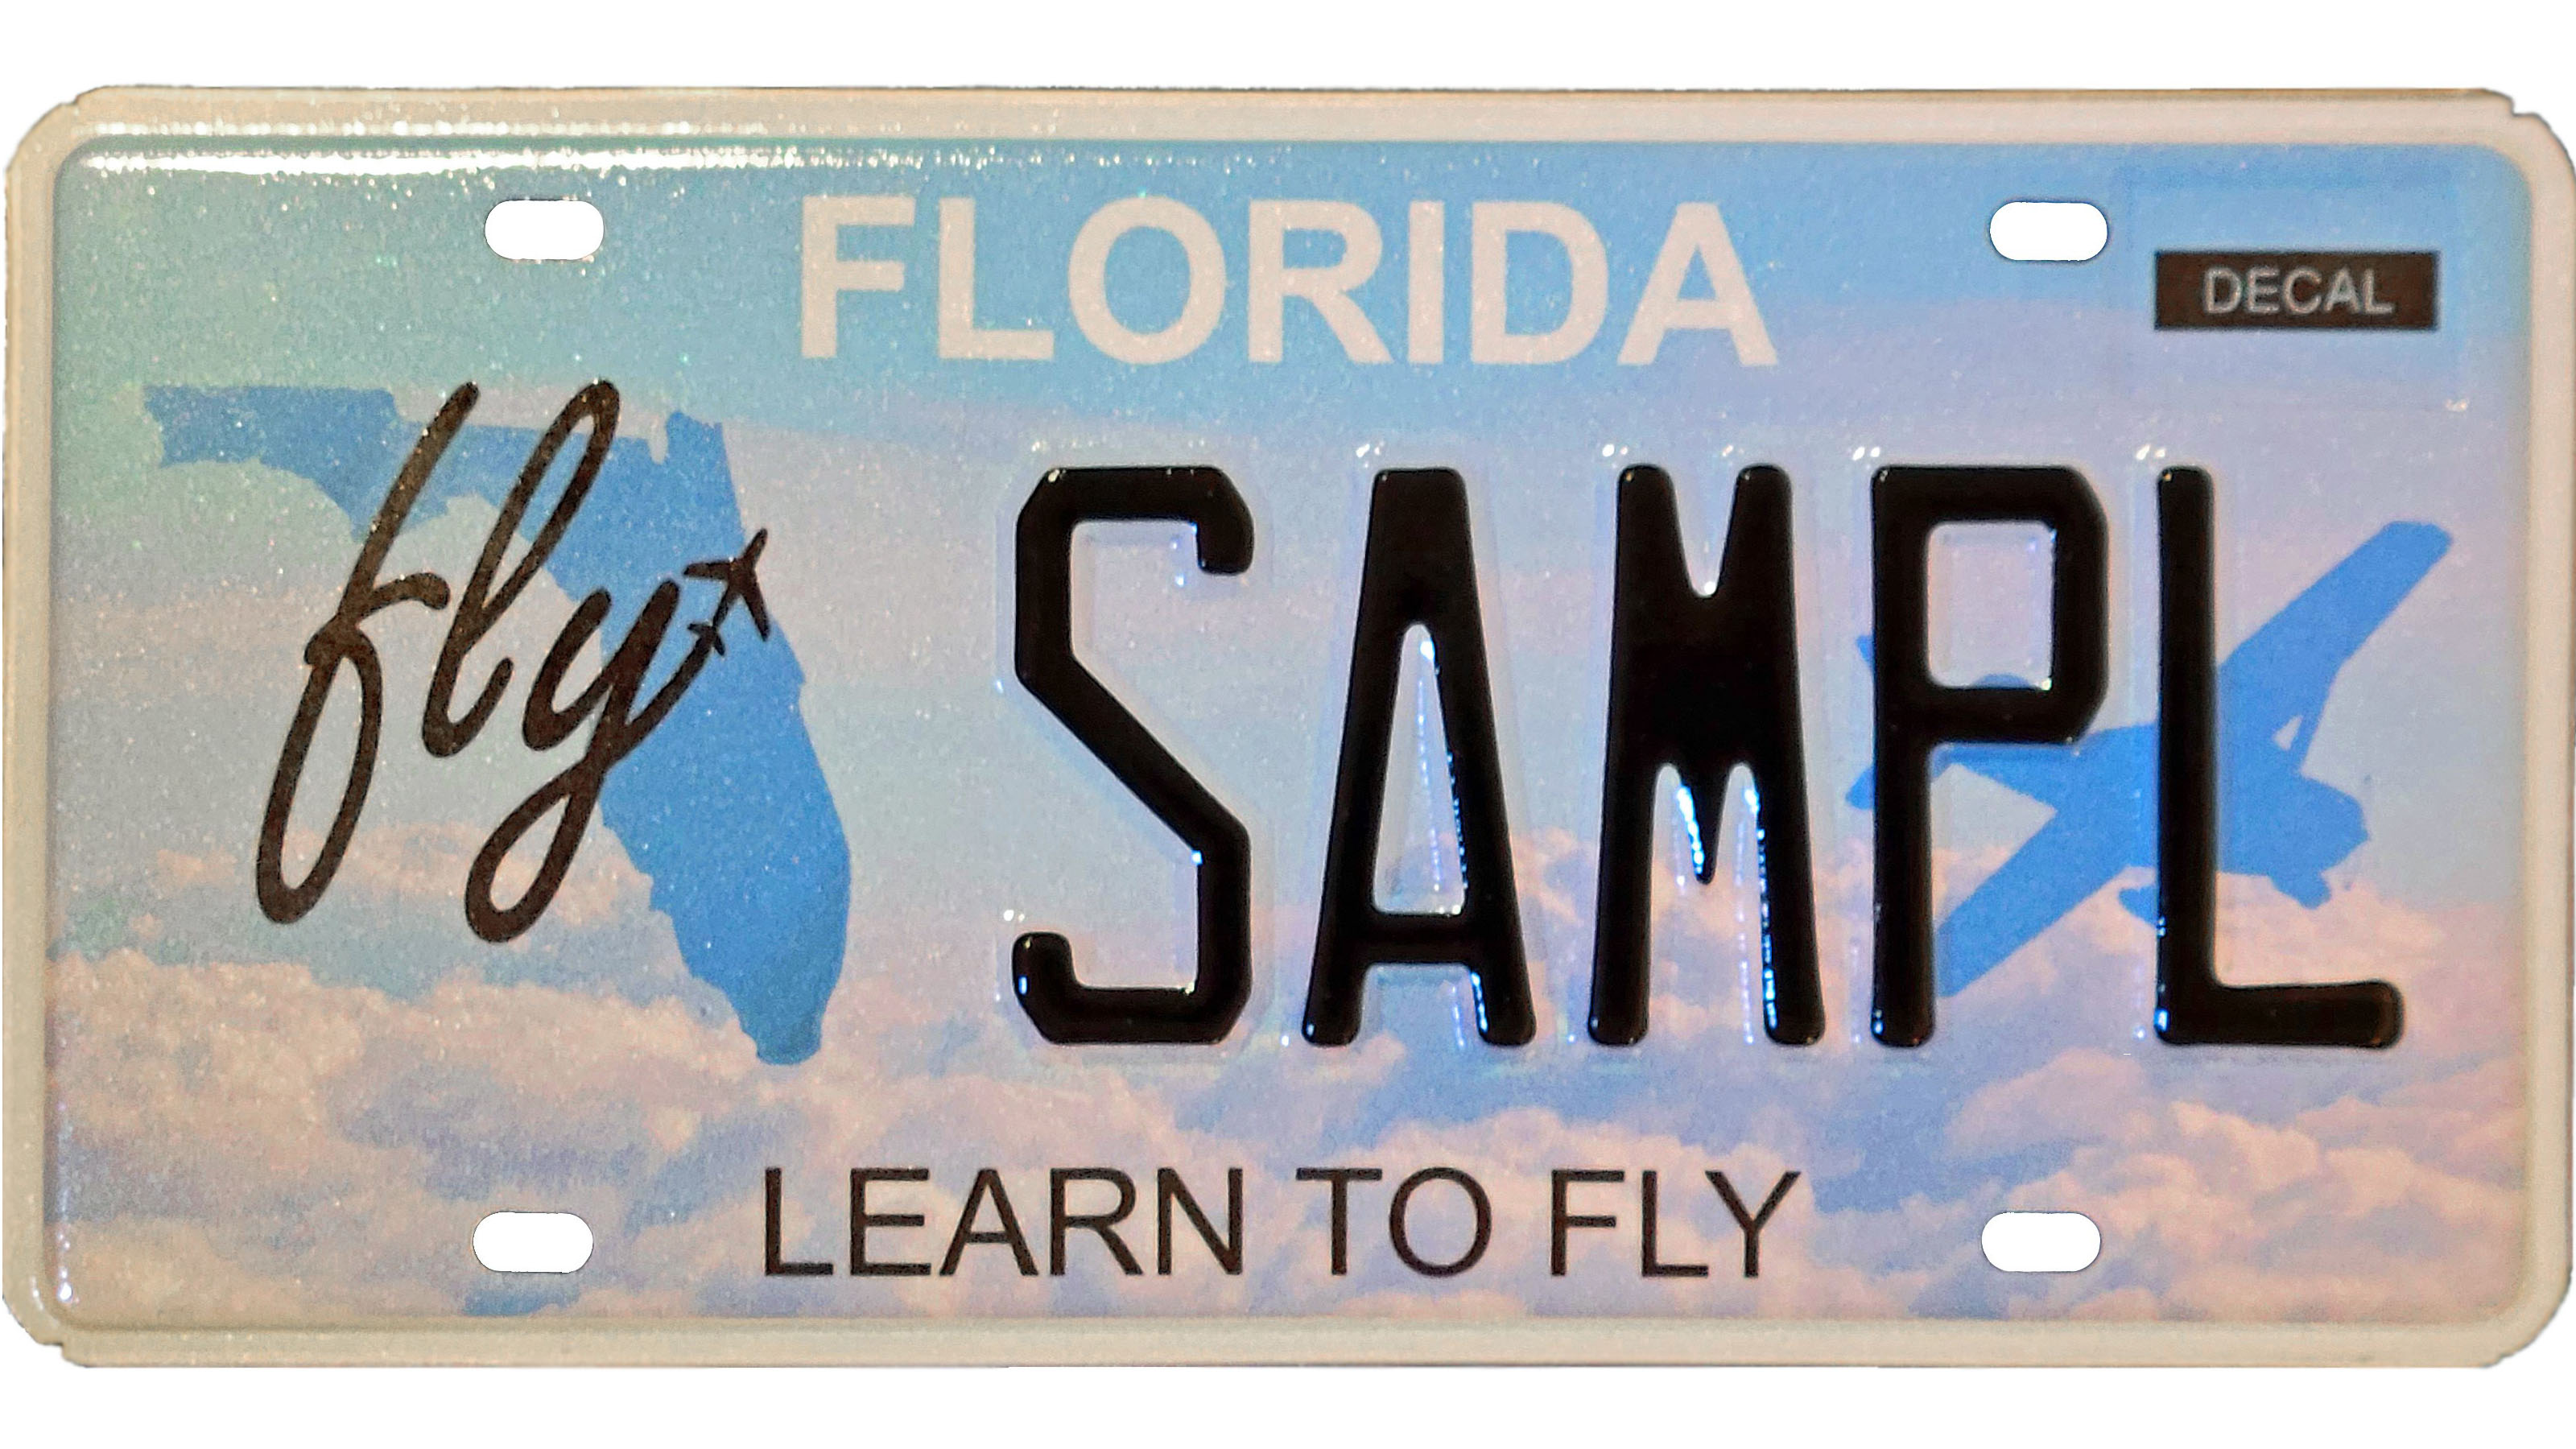 Florida's 'Learn to fly' license plate - AOPA